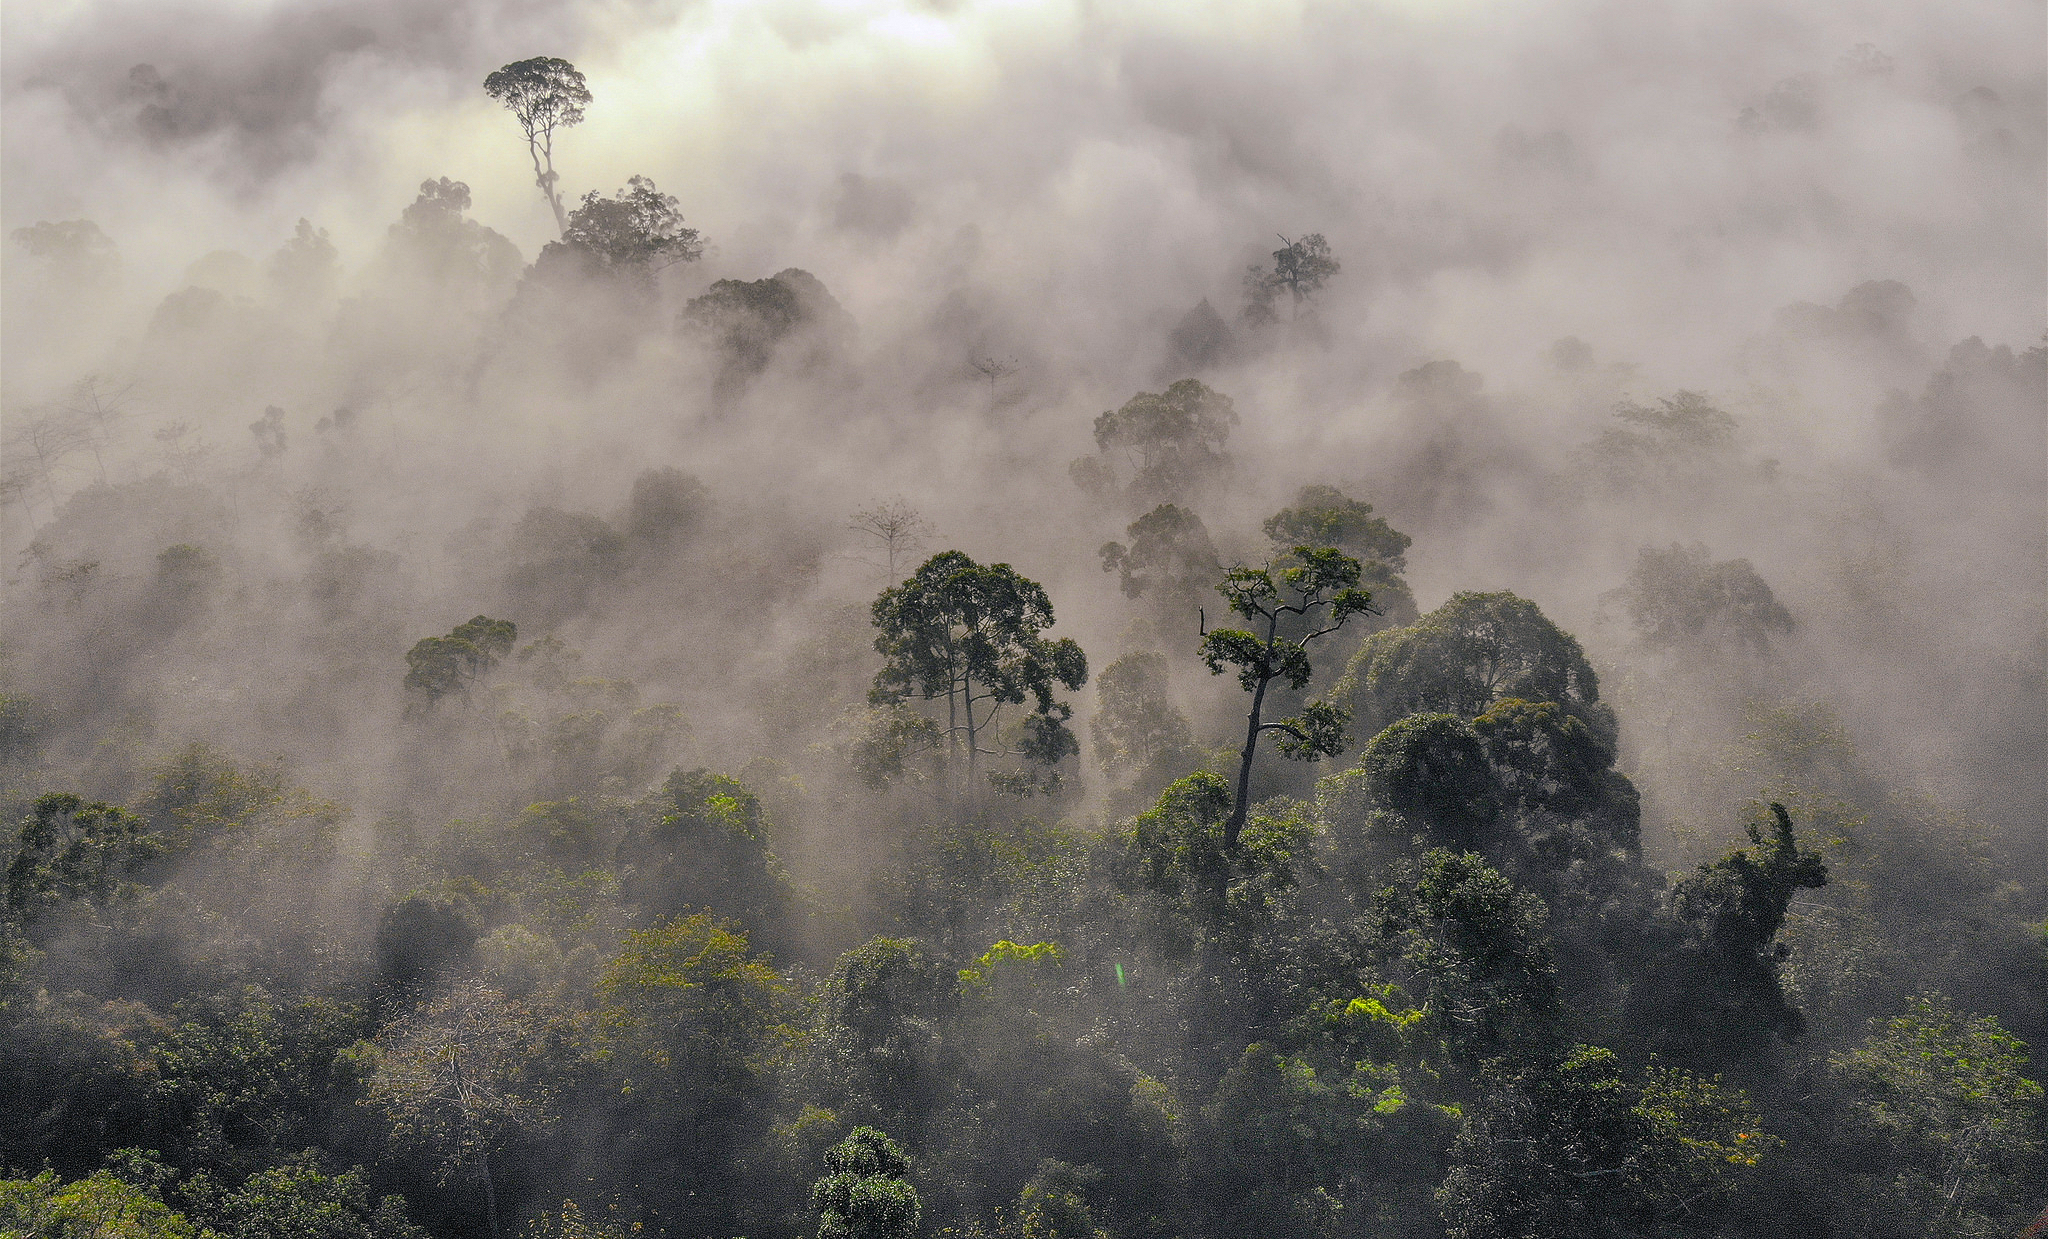 Forest mist in Danum Valley, Sabah, Malaysia. (Image: Christopher Michel)